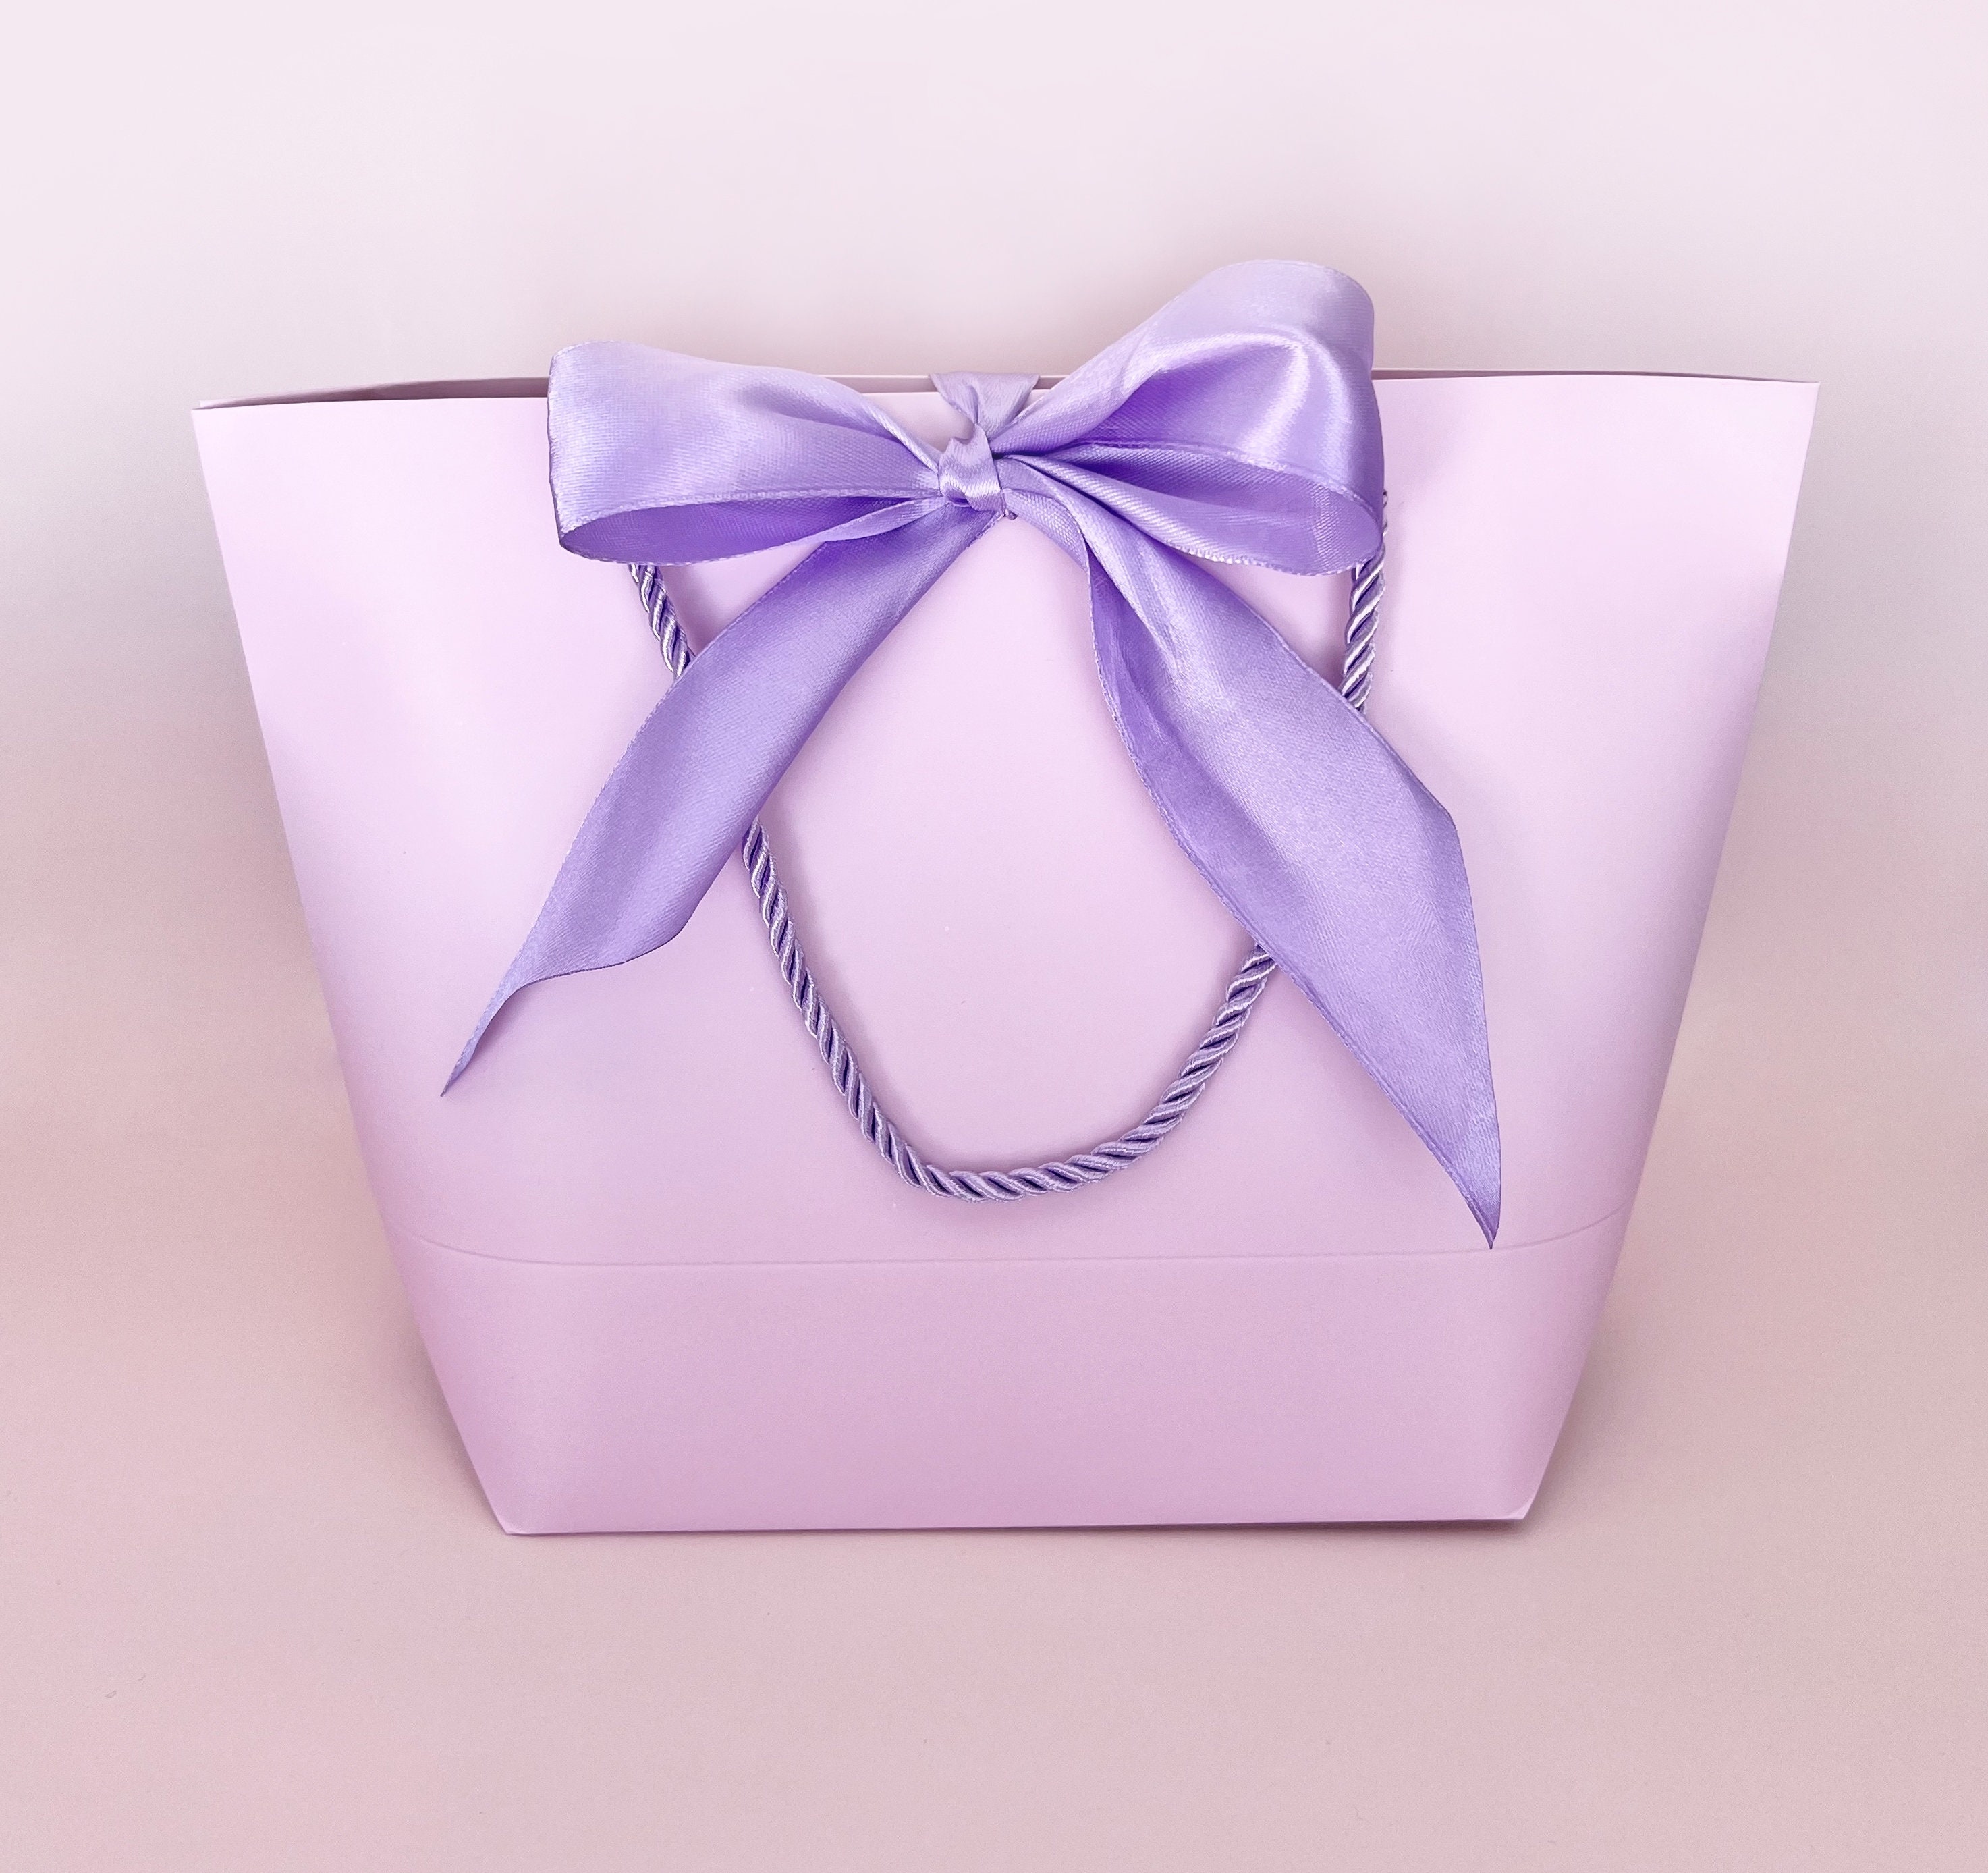 Elegant Light Purple Gift Bag With Light Purple Ribbon and Cords 10-1/2 X  7-1/2 X 3-1/2 Inch for Gift Gifting, Birthday, Wedding 